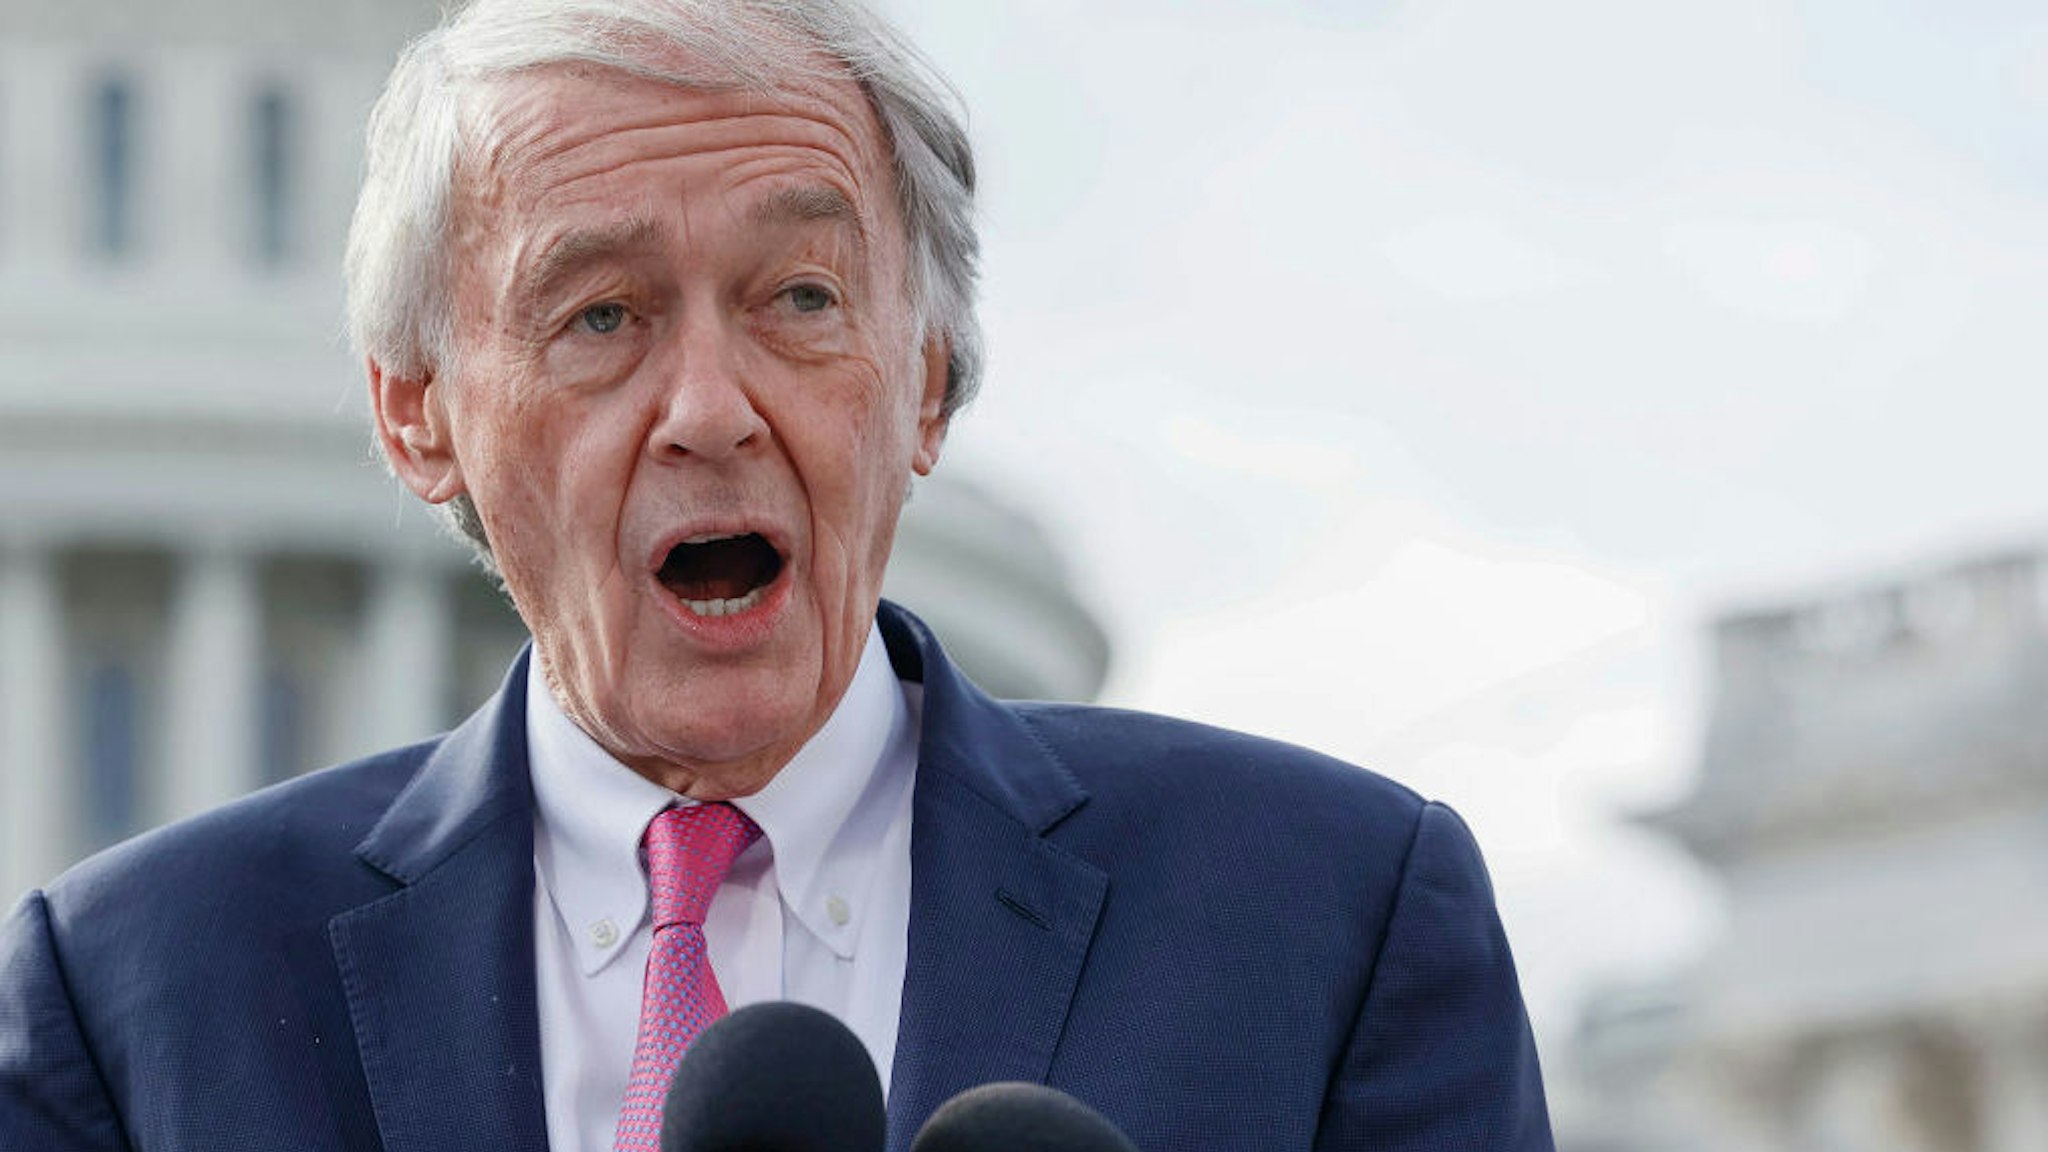 Senator Edward Markey (D-MA) speaks during a press conference held by airport workers and members of SEIU to ask congress to pass the "Good Jobs for Good Airports Act" on Capitol Hill on December 08, 2022 in Washington, DC.